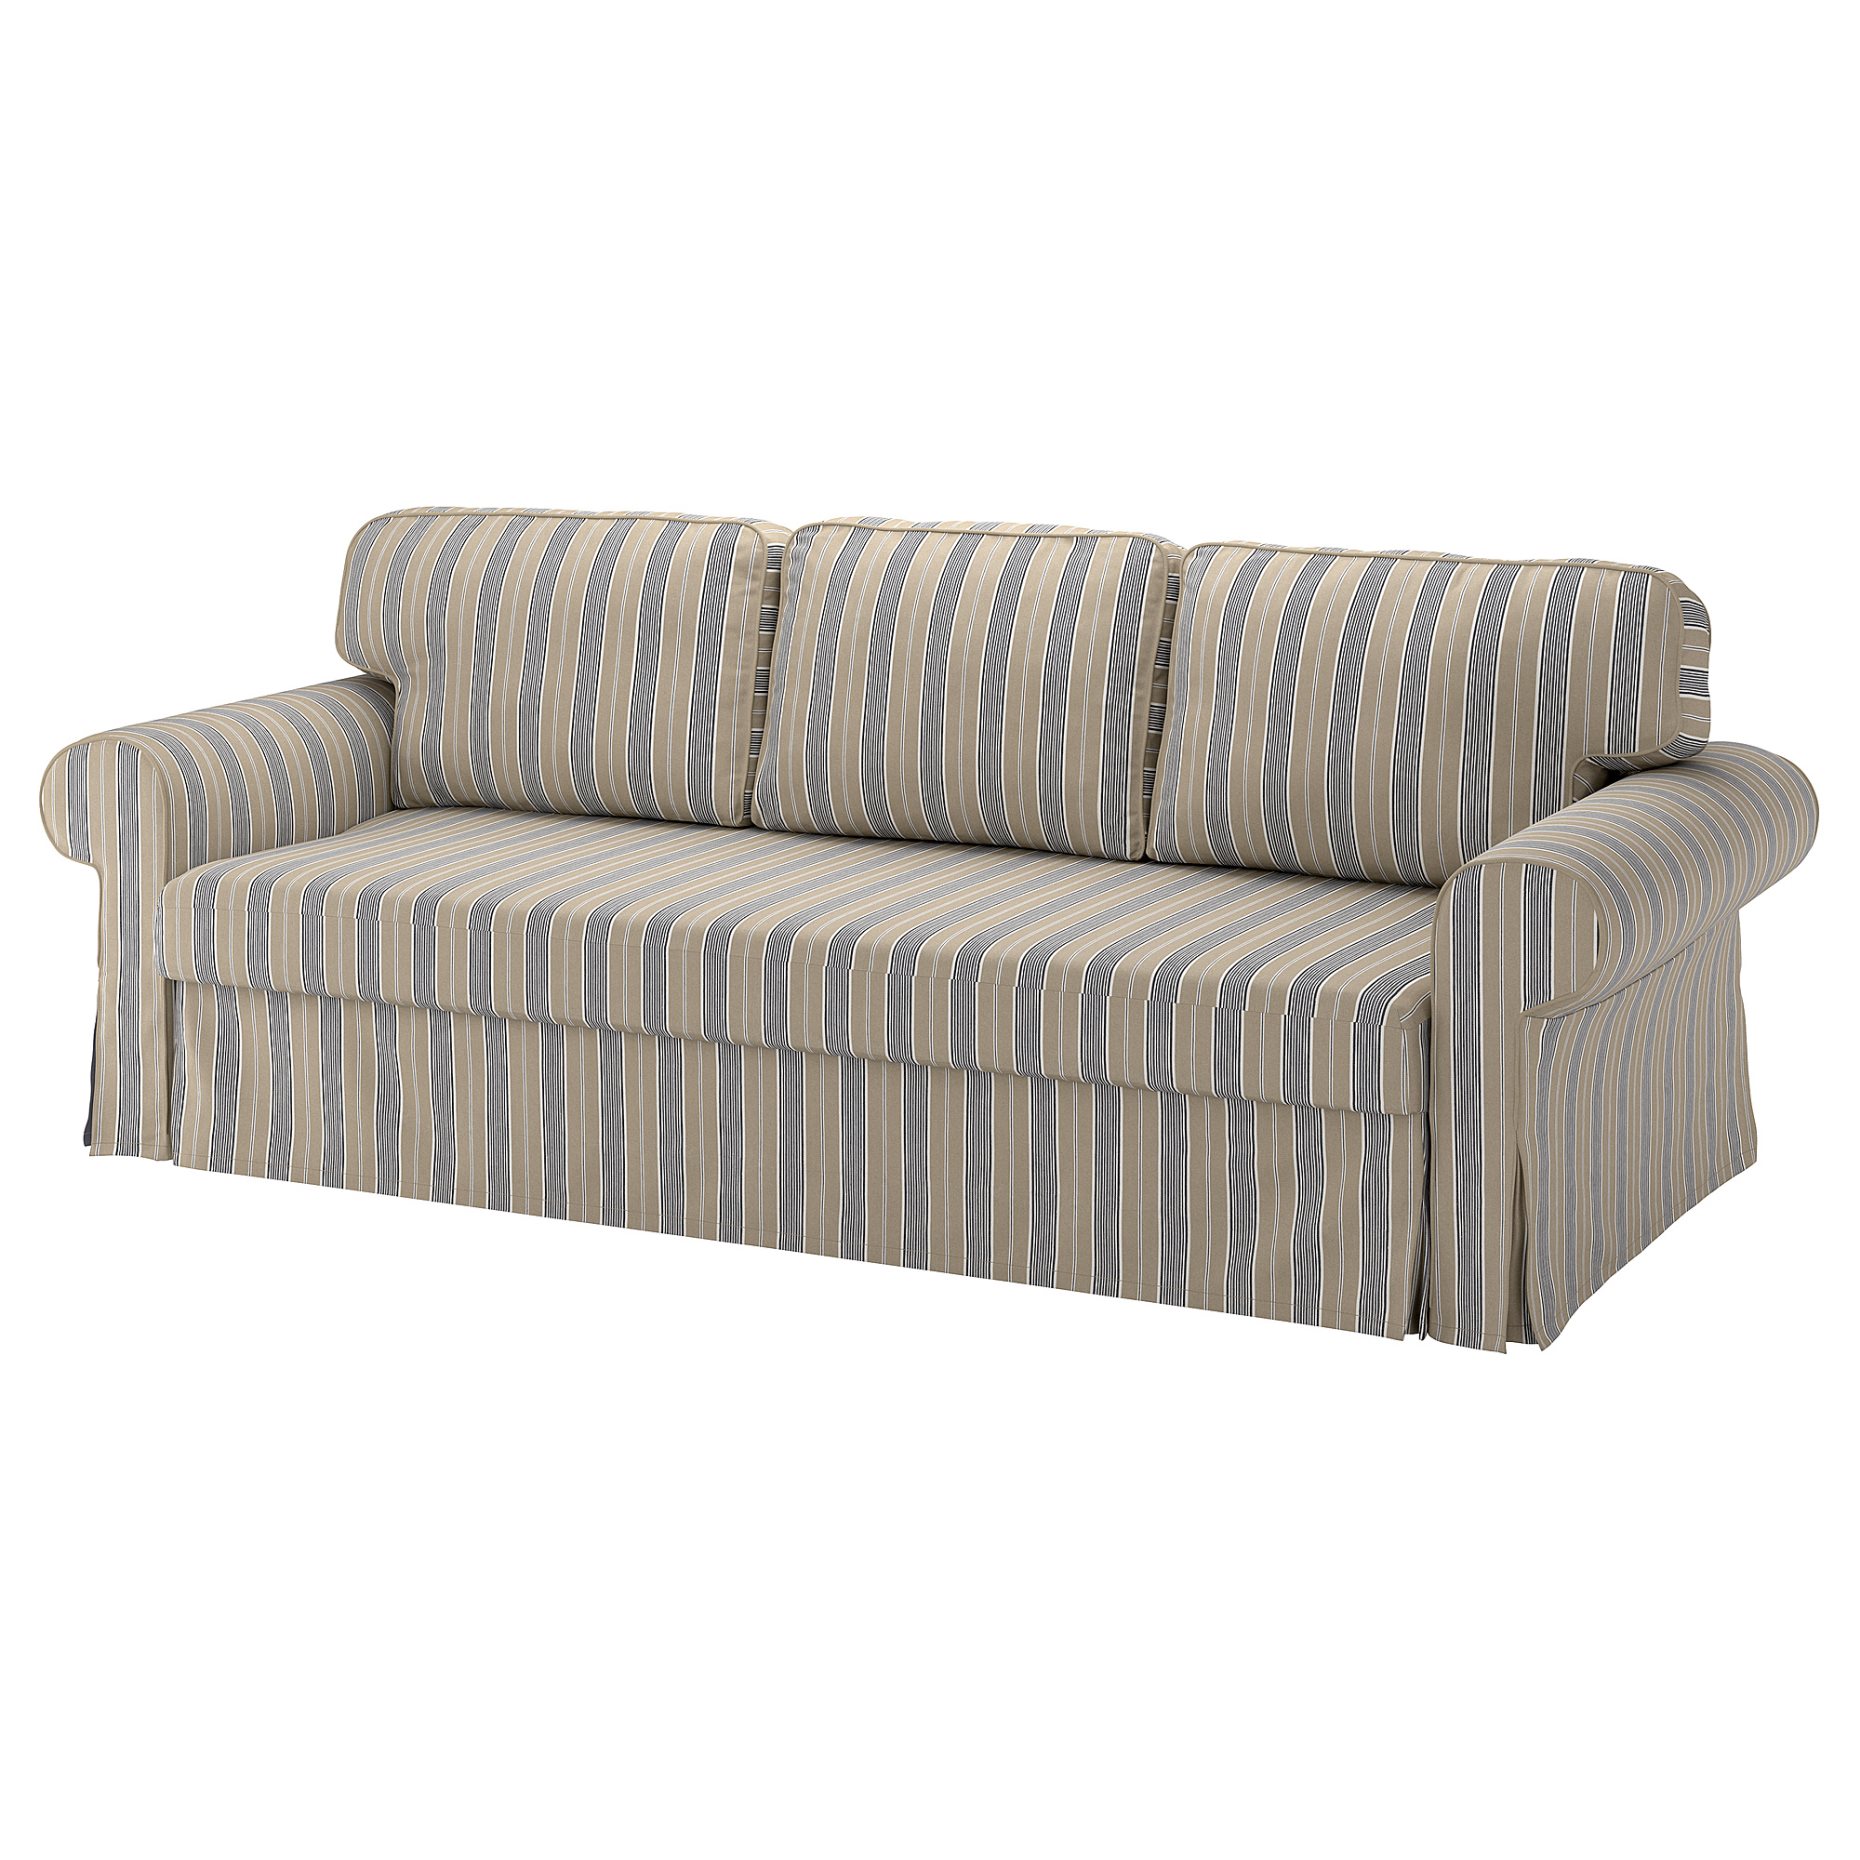 VRETSTORP, cover for 3-seat sofa-bed, 905.476.23